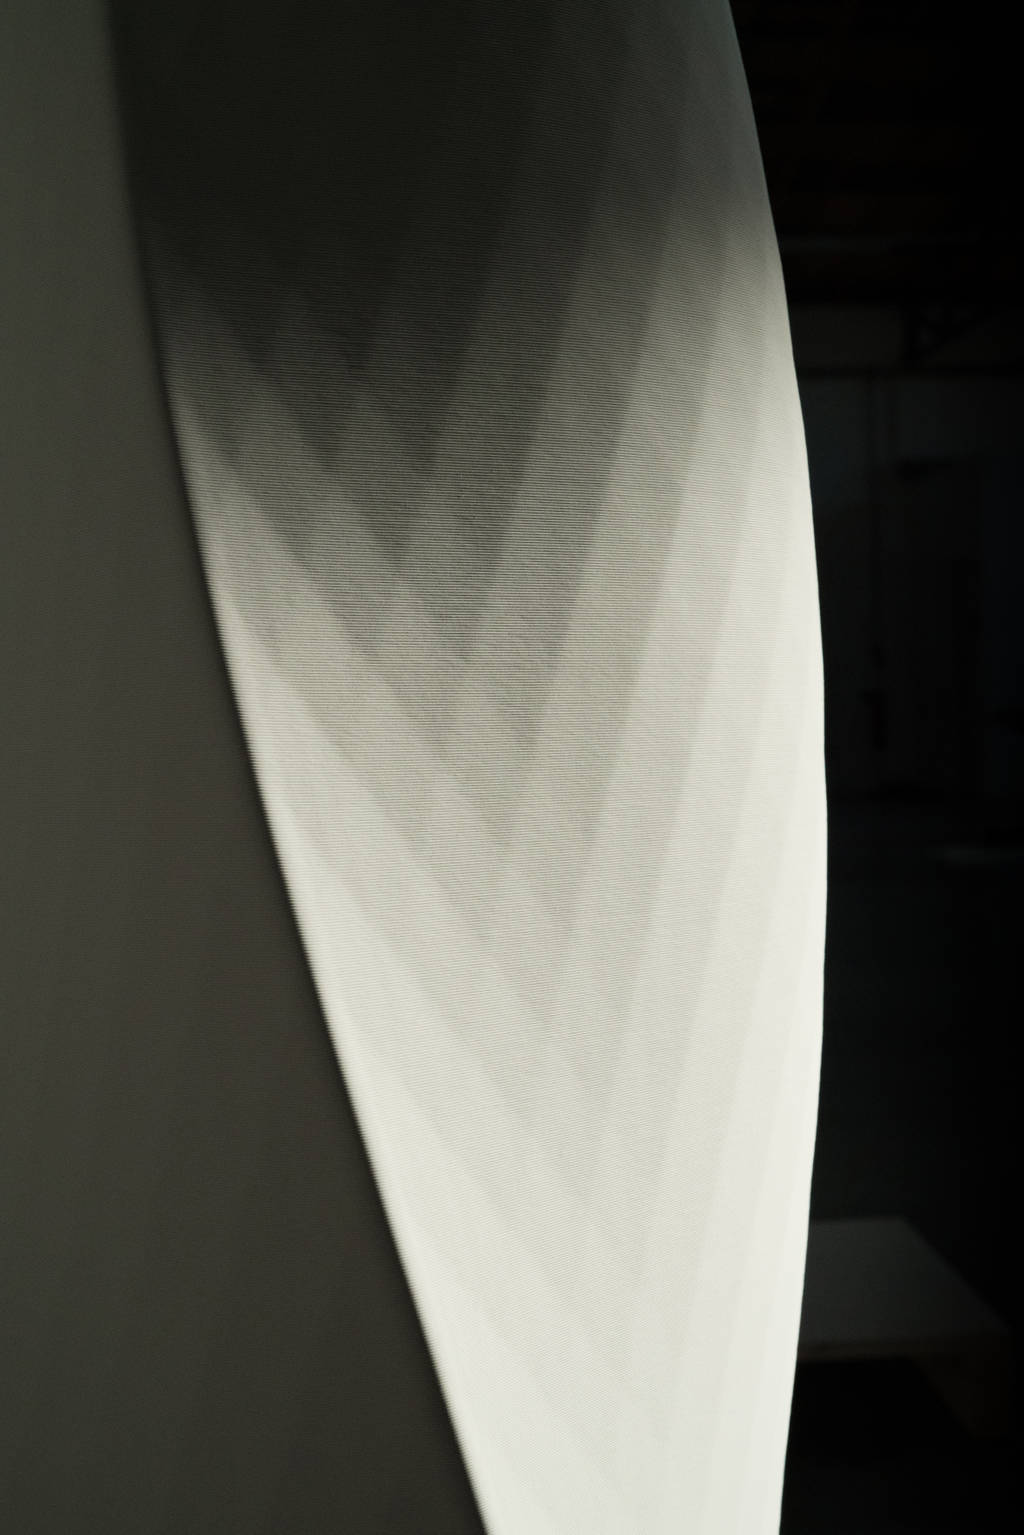 Natural interplay of patterns and light on porcelain